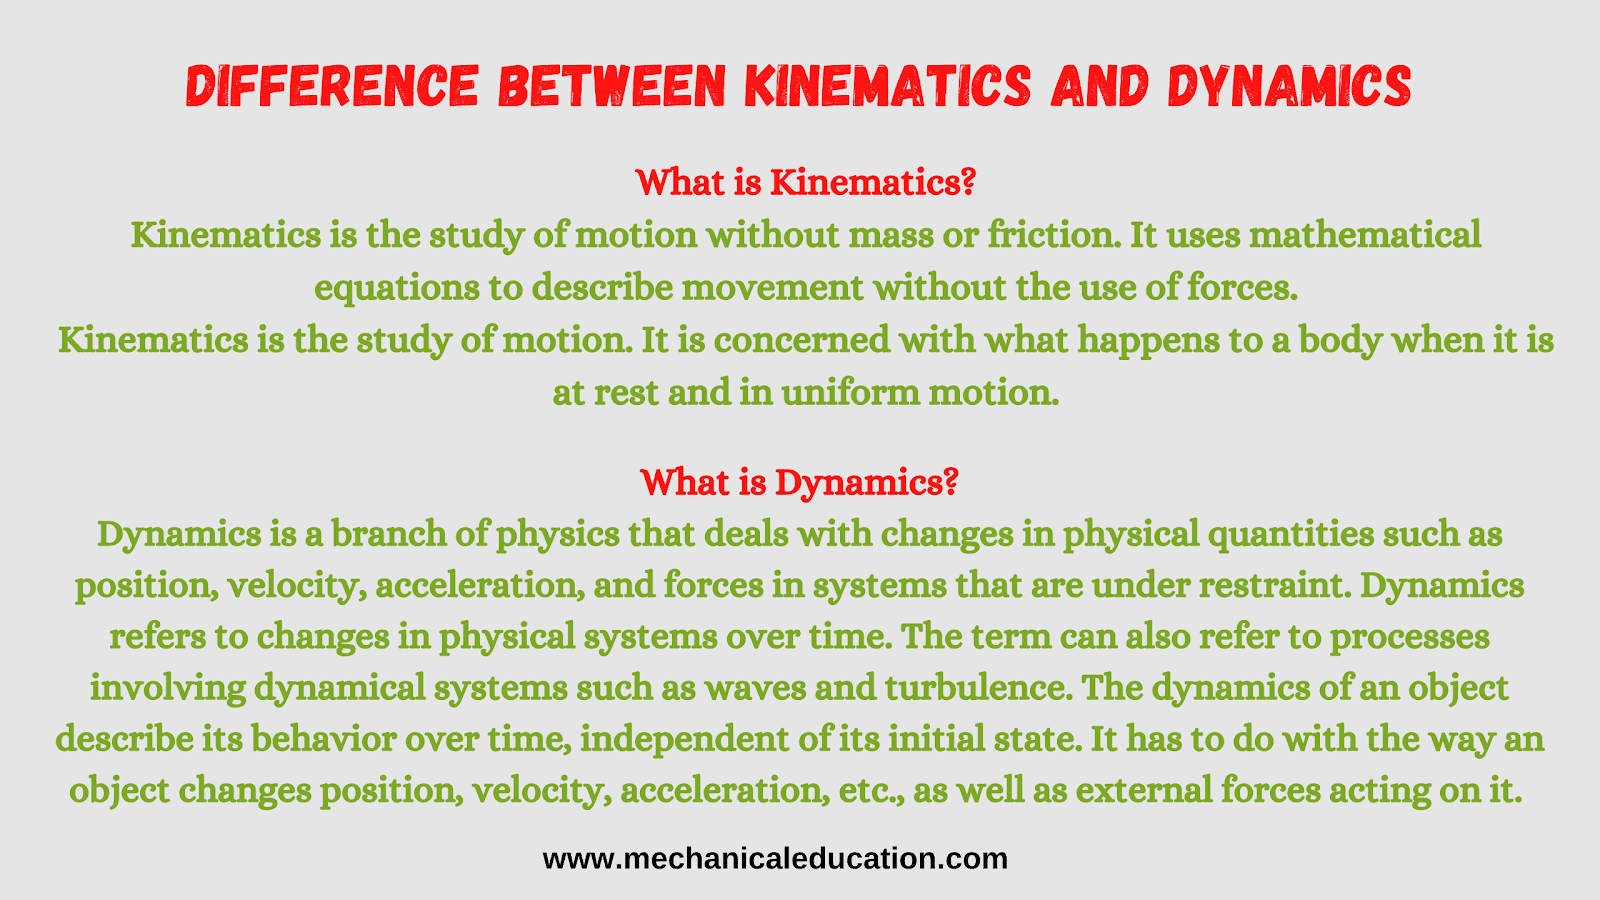 What is the difference between dynamic and dynamics?